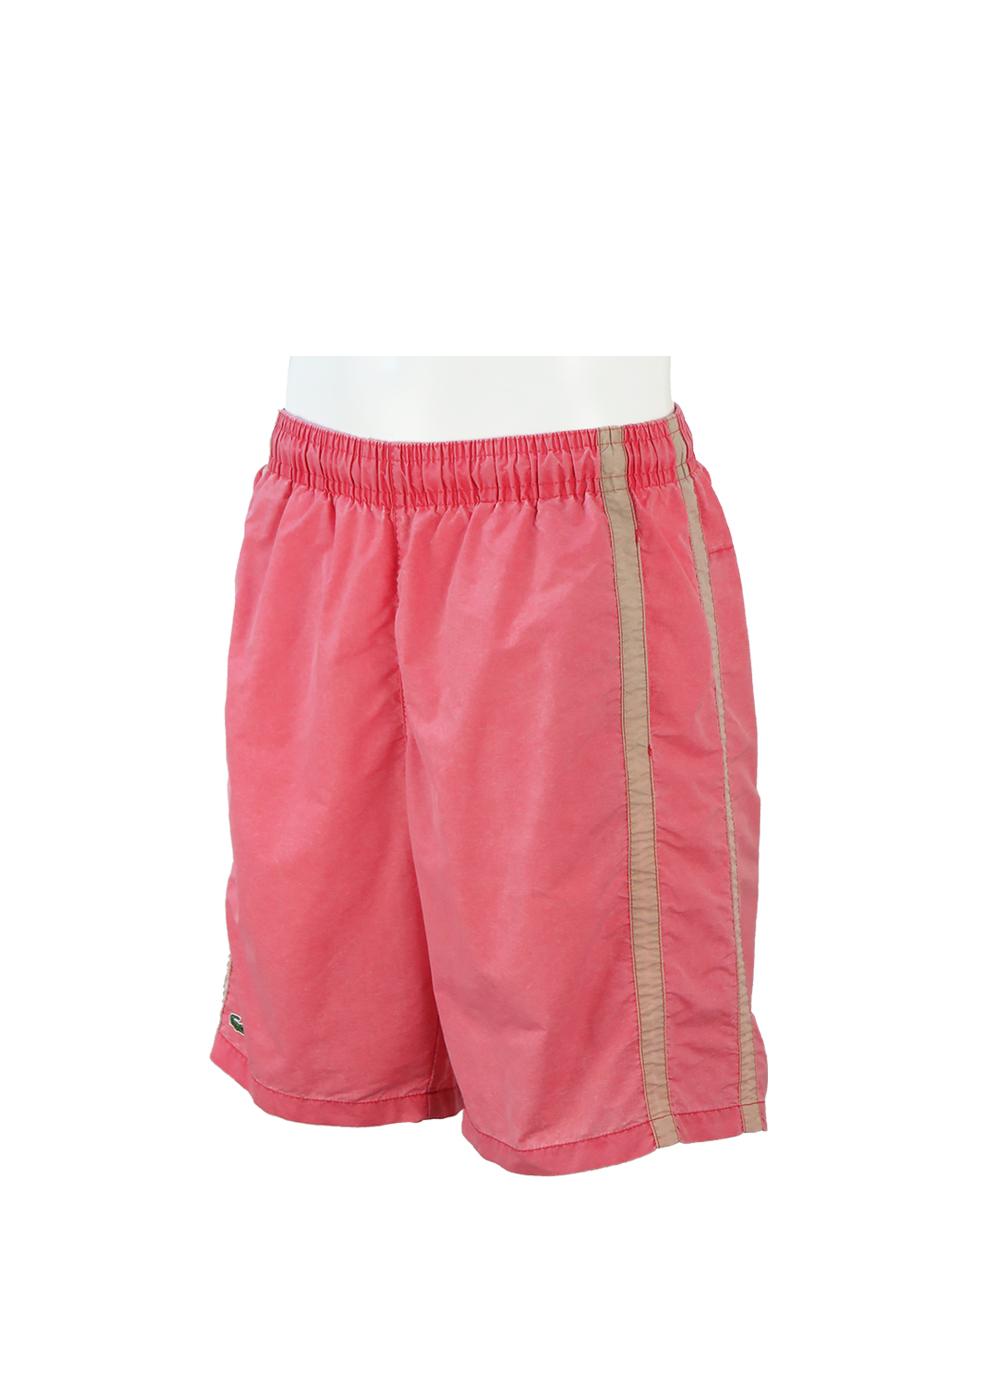 Lacoste Coral Pink Swim Shorts with Beige Side Stripes - M/L | Reign ...